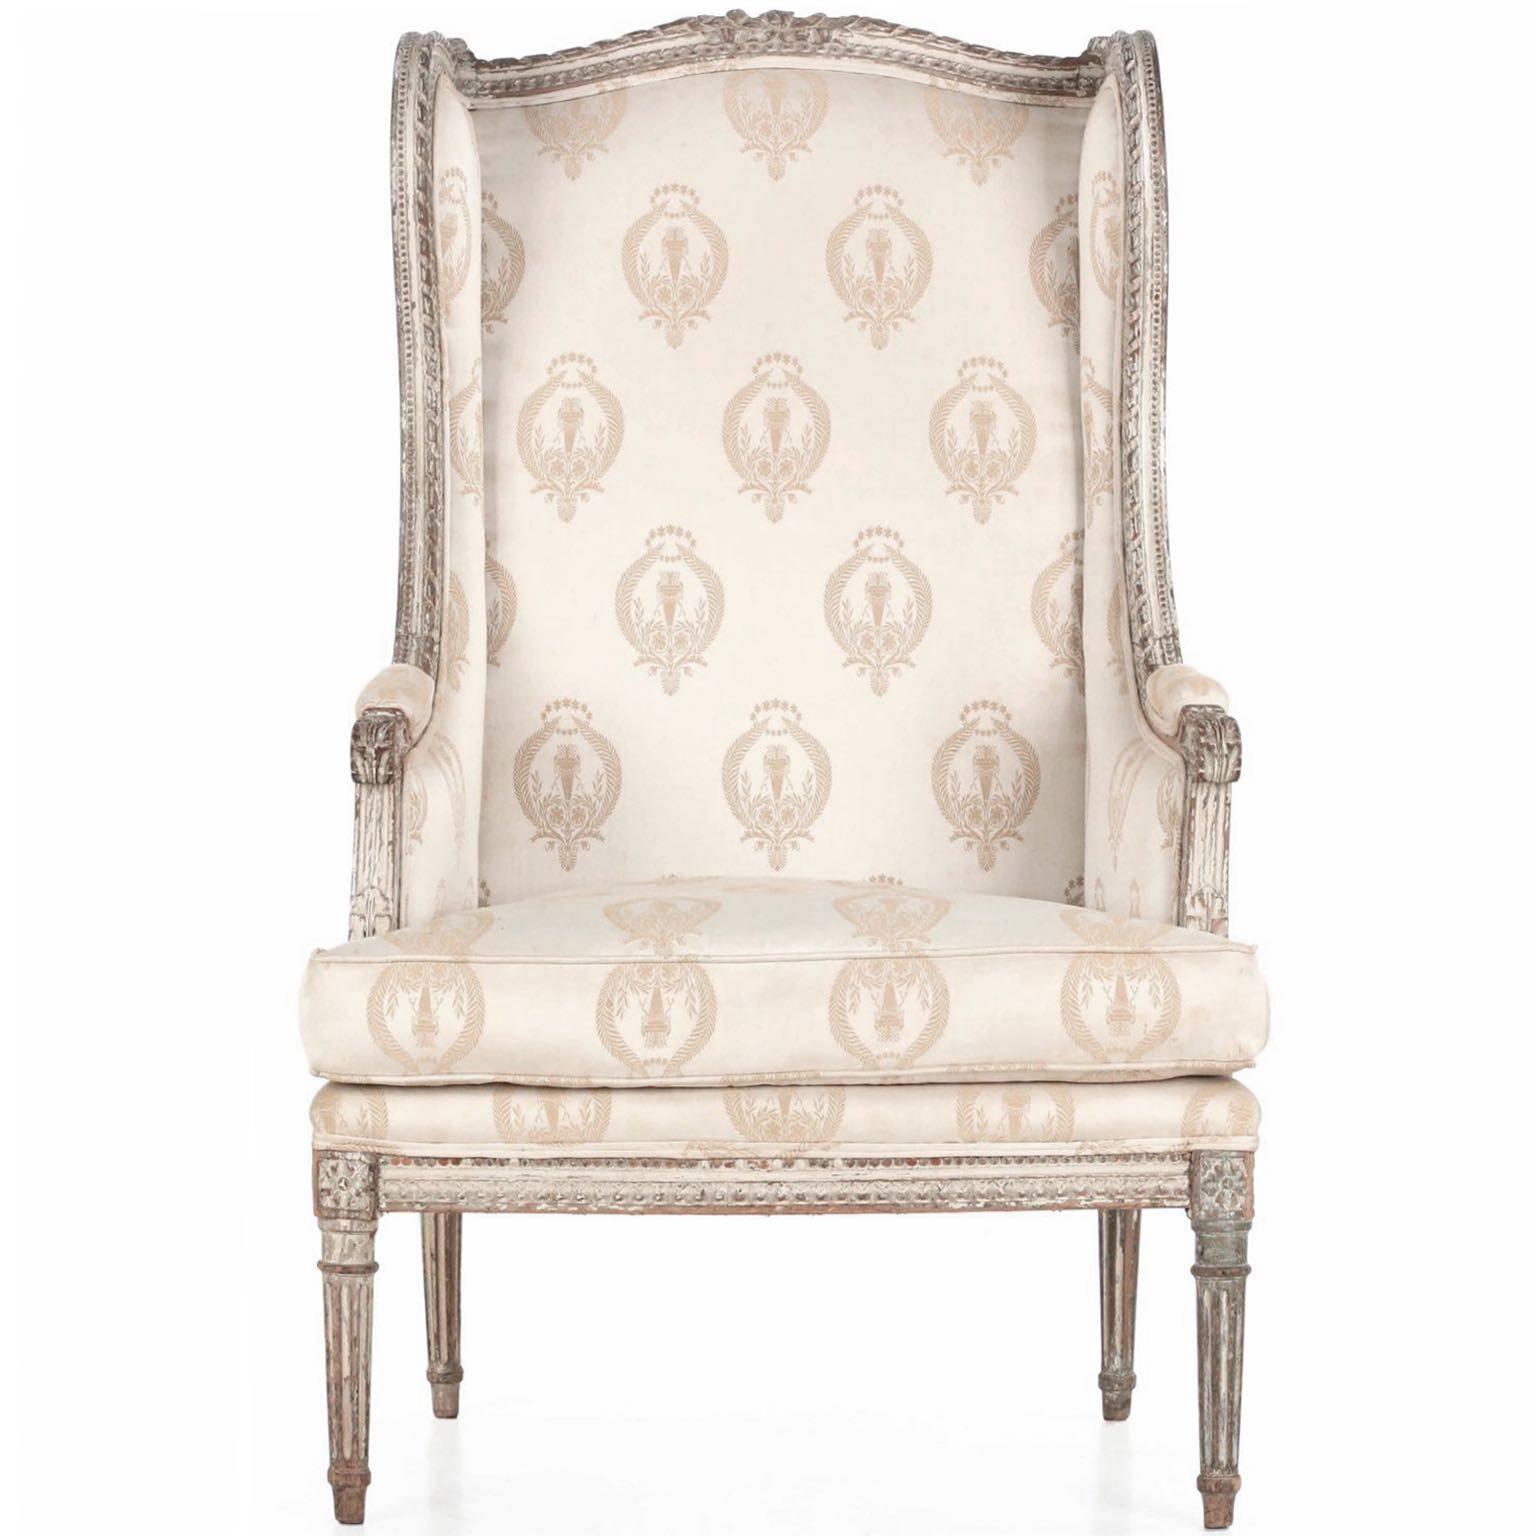 This delightfully worn chair of the Louis XVI taste has such beauty in the numerous layers of scrubbed cream, white and gray paint; the carvings are crisp in recesses and naturally softened in areas of greatest handling. Built to last the test of